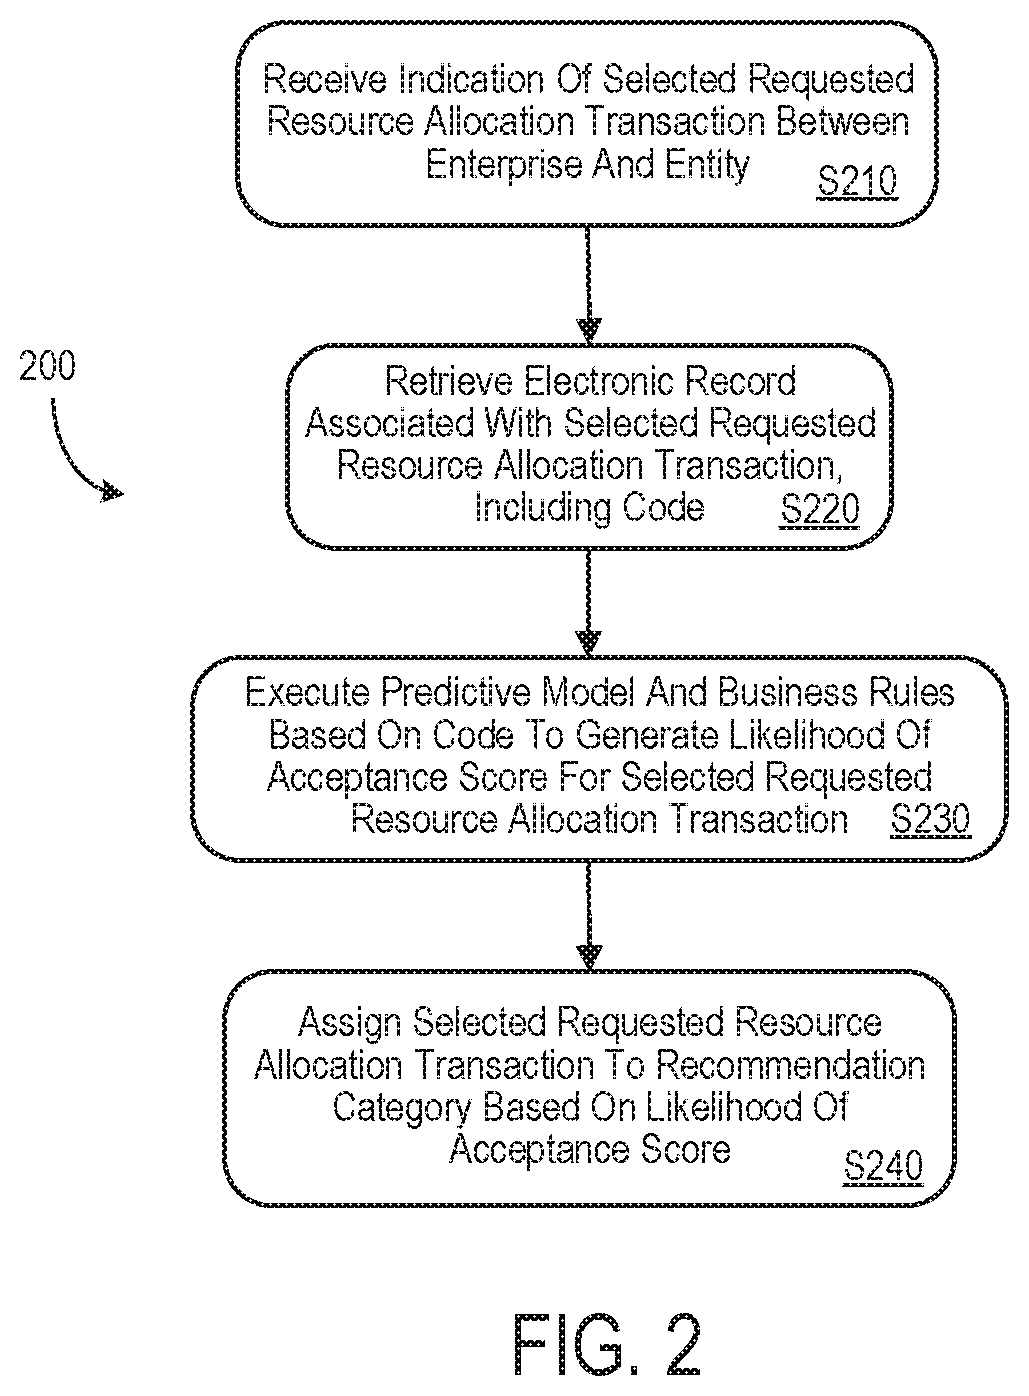 System and method providing risk relationship transaction automation in accordance with medical condition code